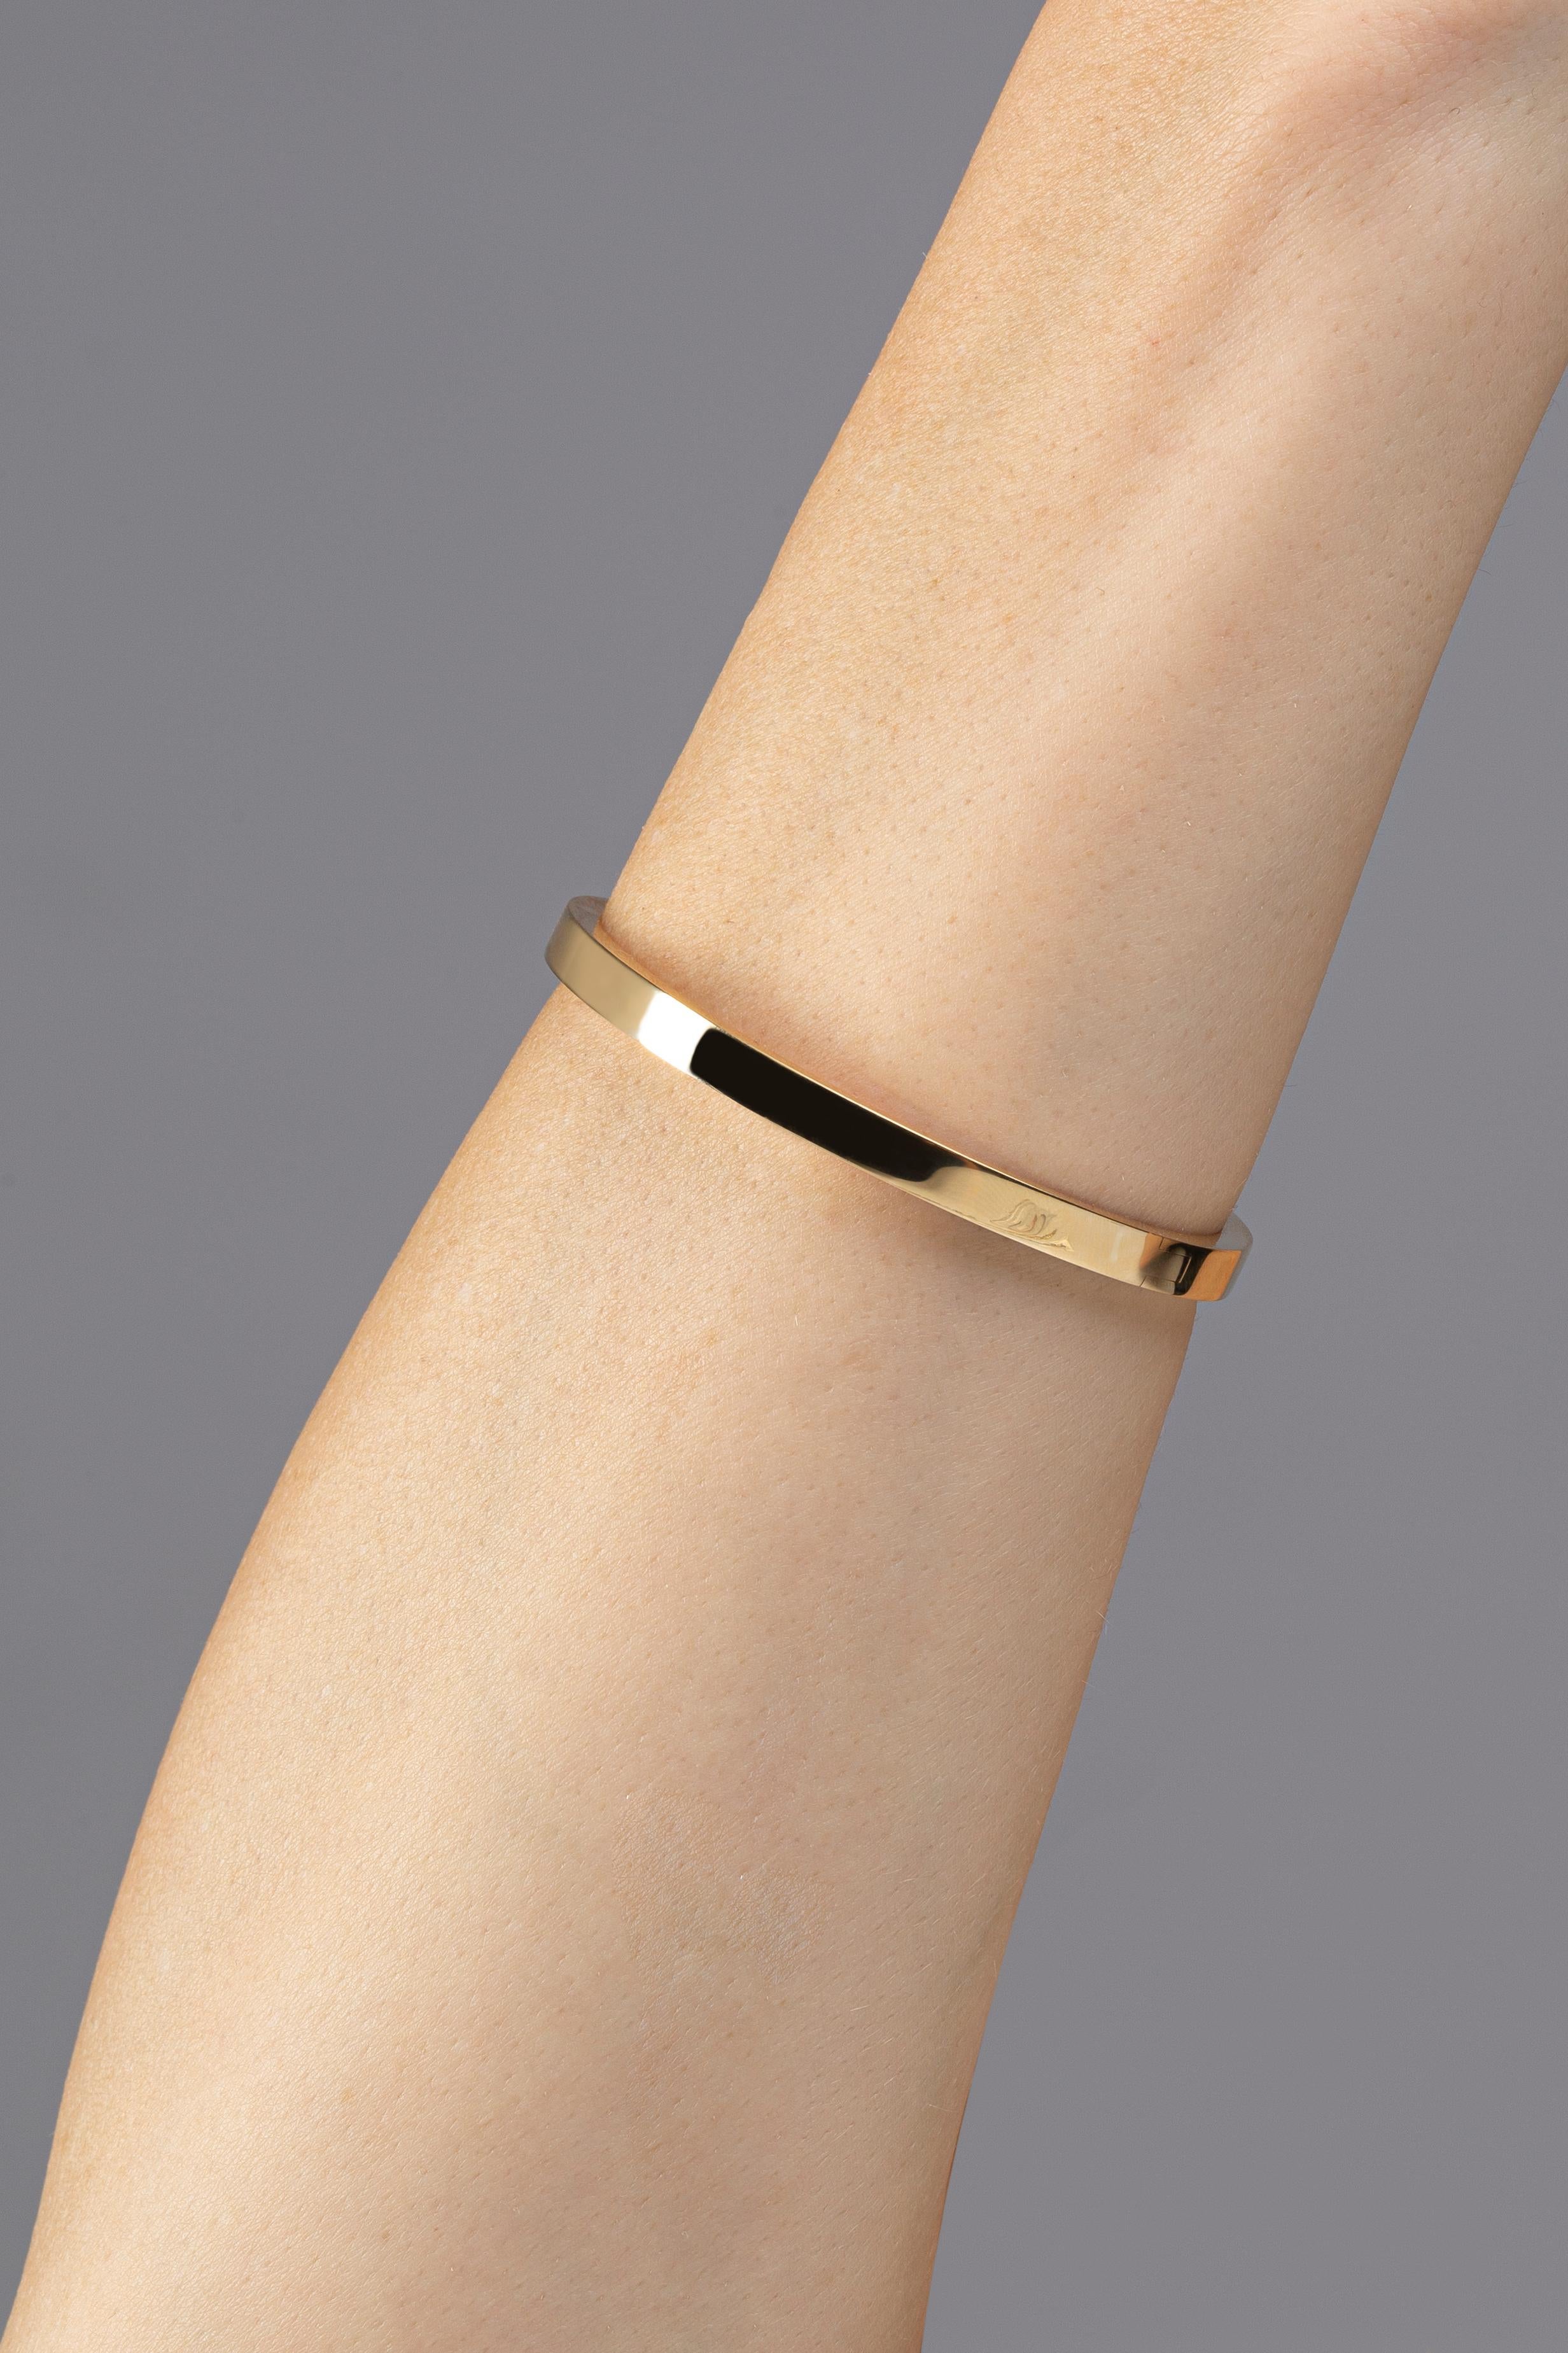 Alex Jona design collection, hand crafted in Italy, 18 karat yellow gold bangle bracelet.
Dimensions: 2.07 in. H x 2.53 in. W x 0.18 in. D  -  52 mm. H x 64 mm. W x 5 mm. D

Alex Jona jewels stand out, not only for their special design and for the